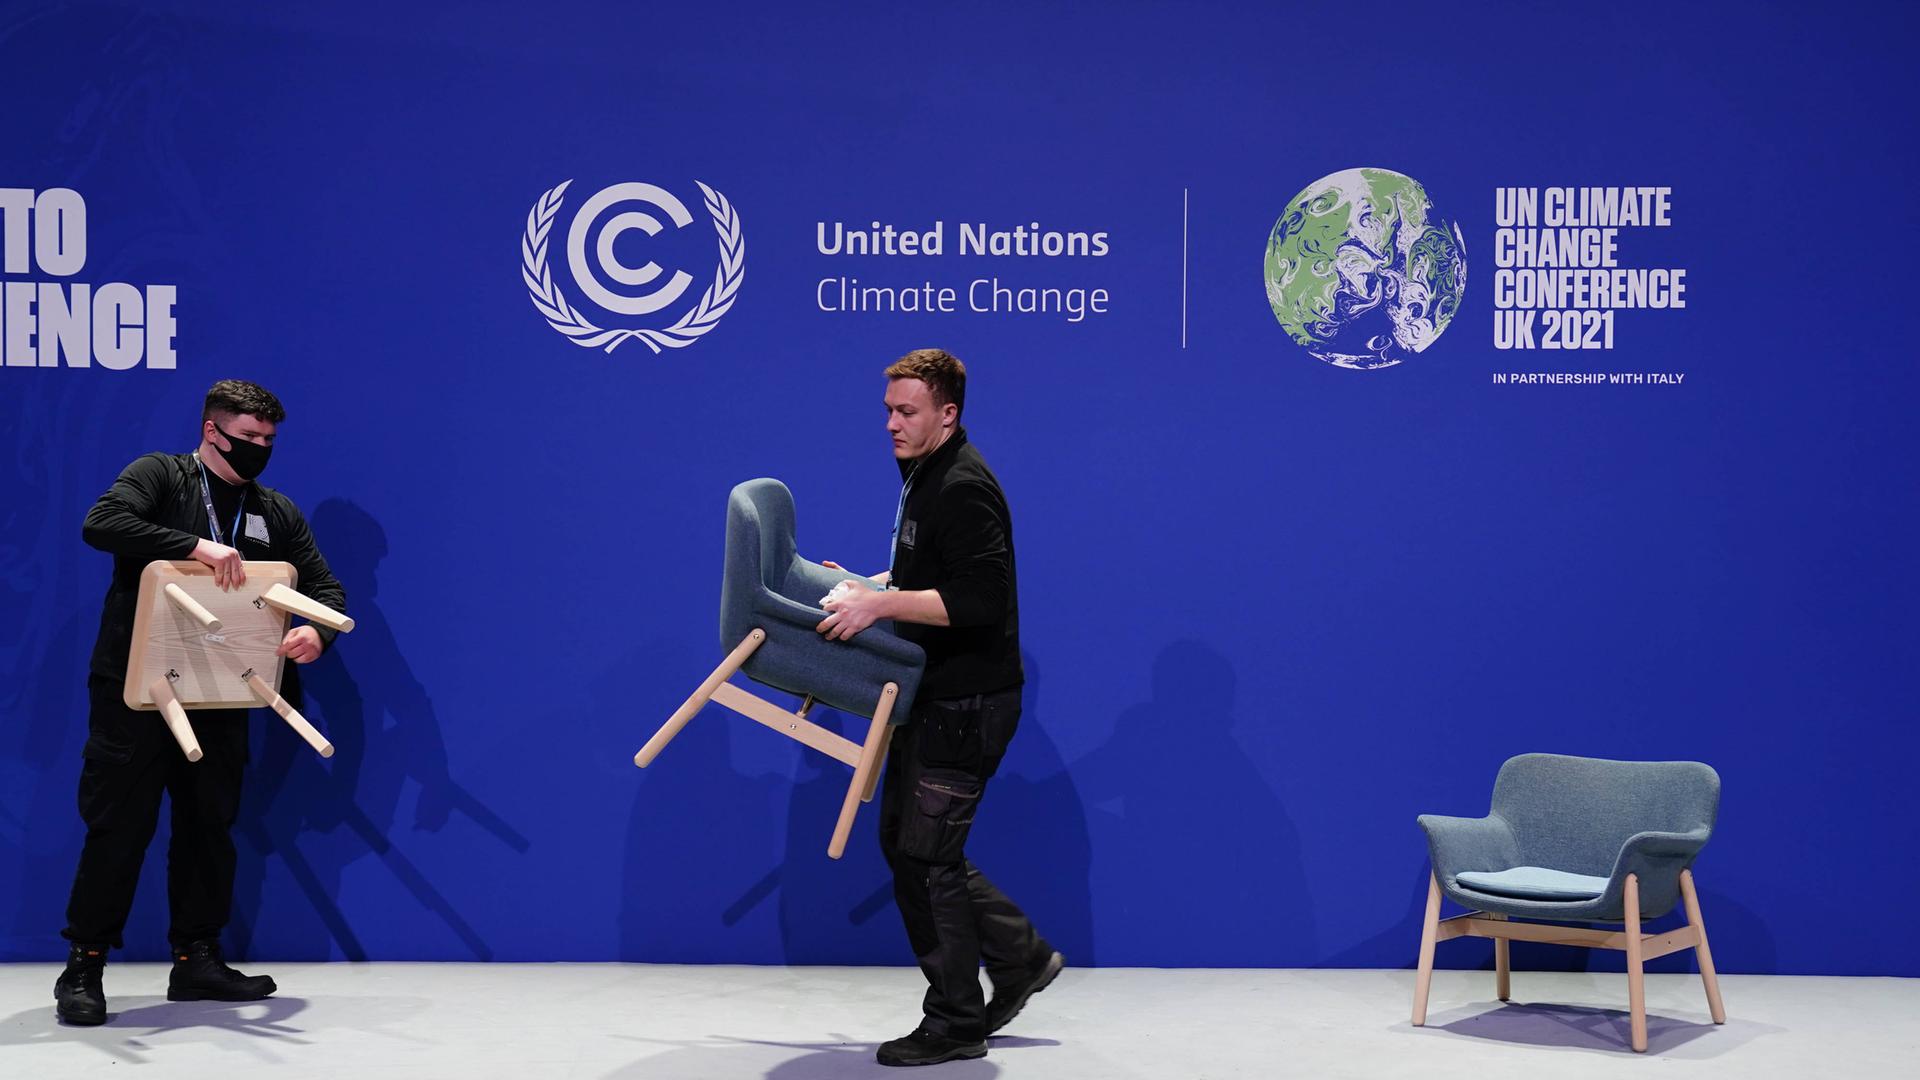 November 13, 2021, Glasgow, UK: Staff remove chairs and dismantle one of the stages, during an overun day of the Cop26